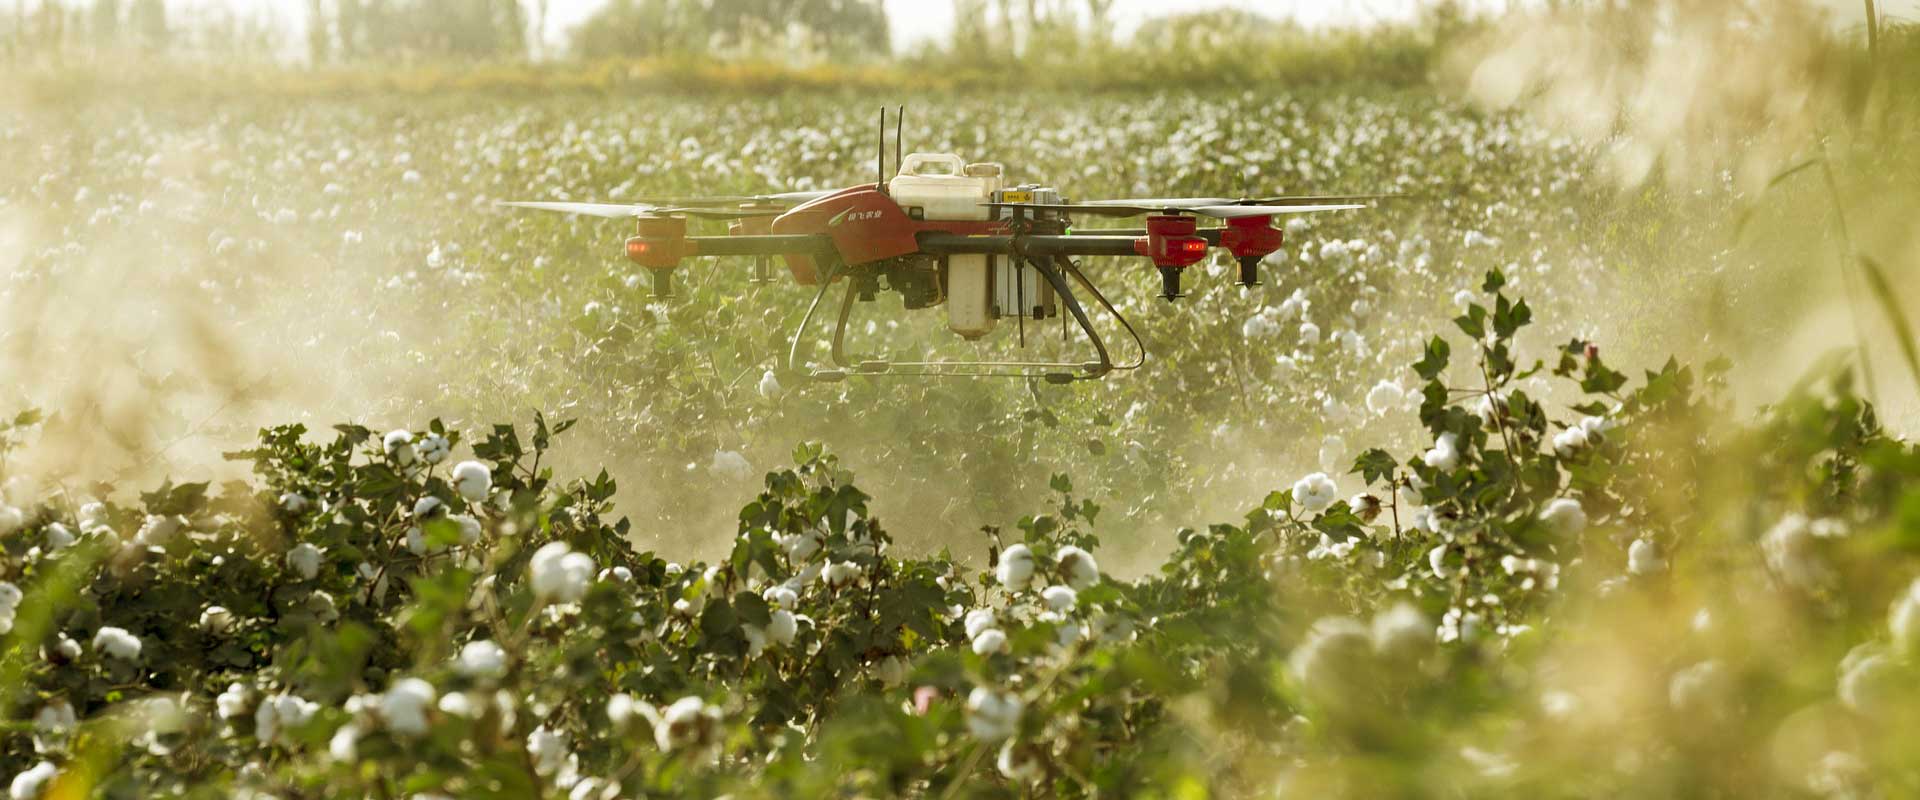 Drone Technology and Agriculture – A Happy Marriage